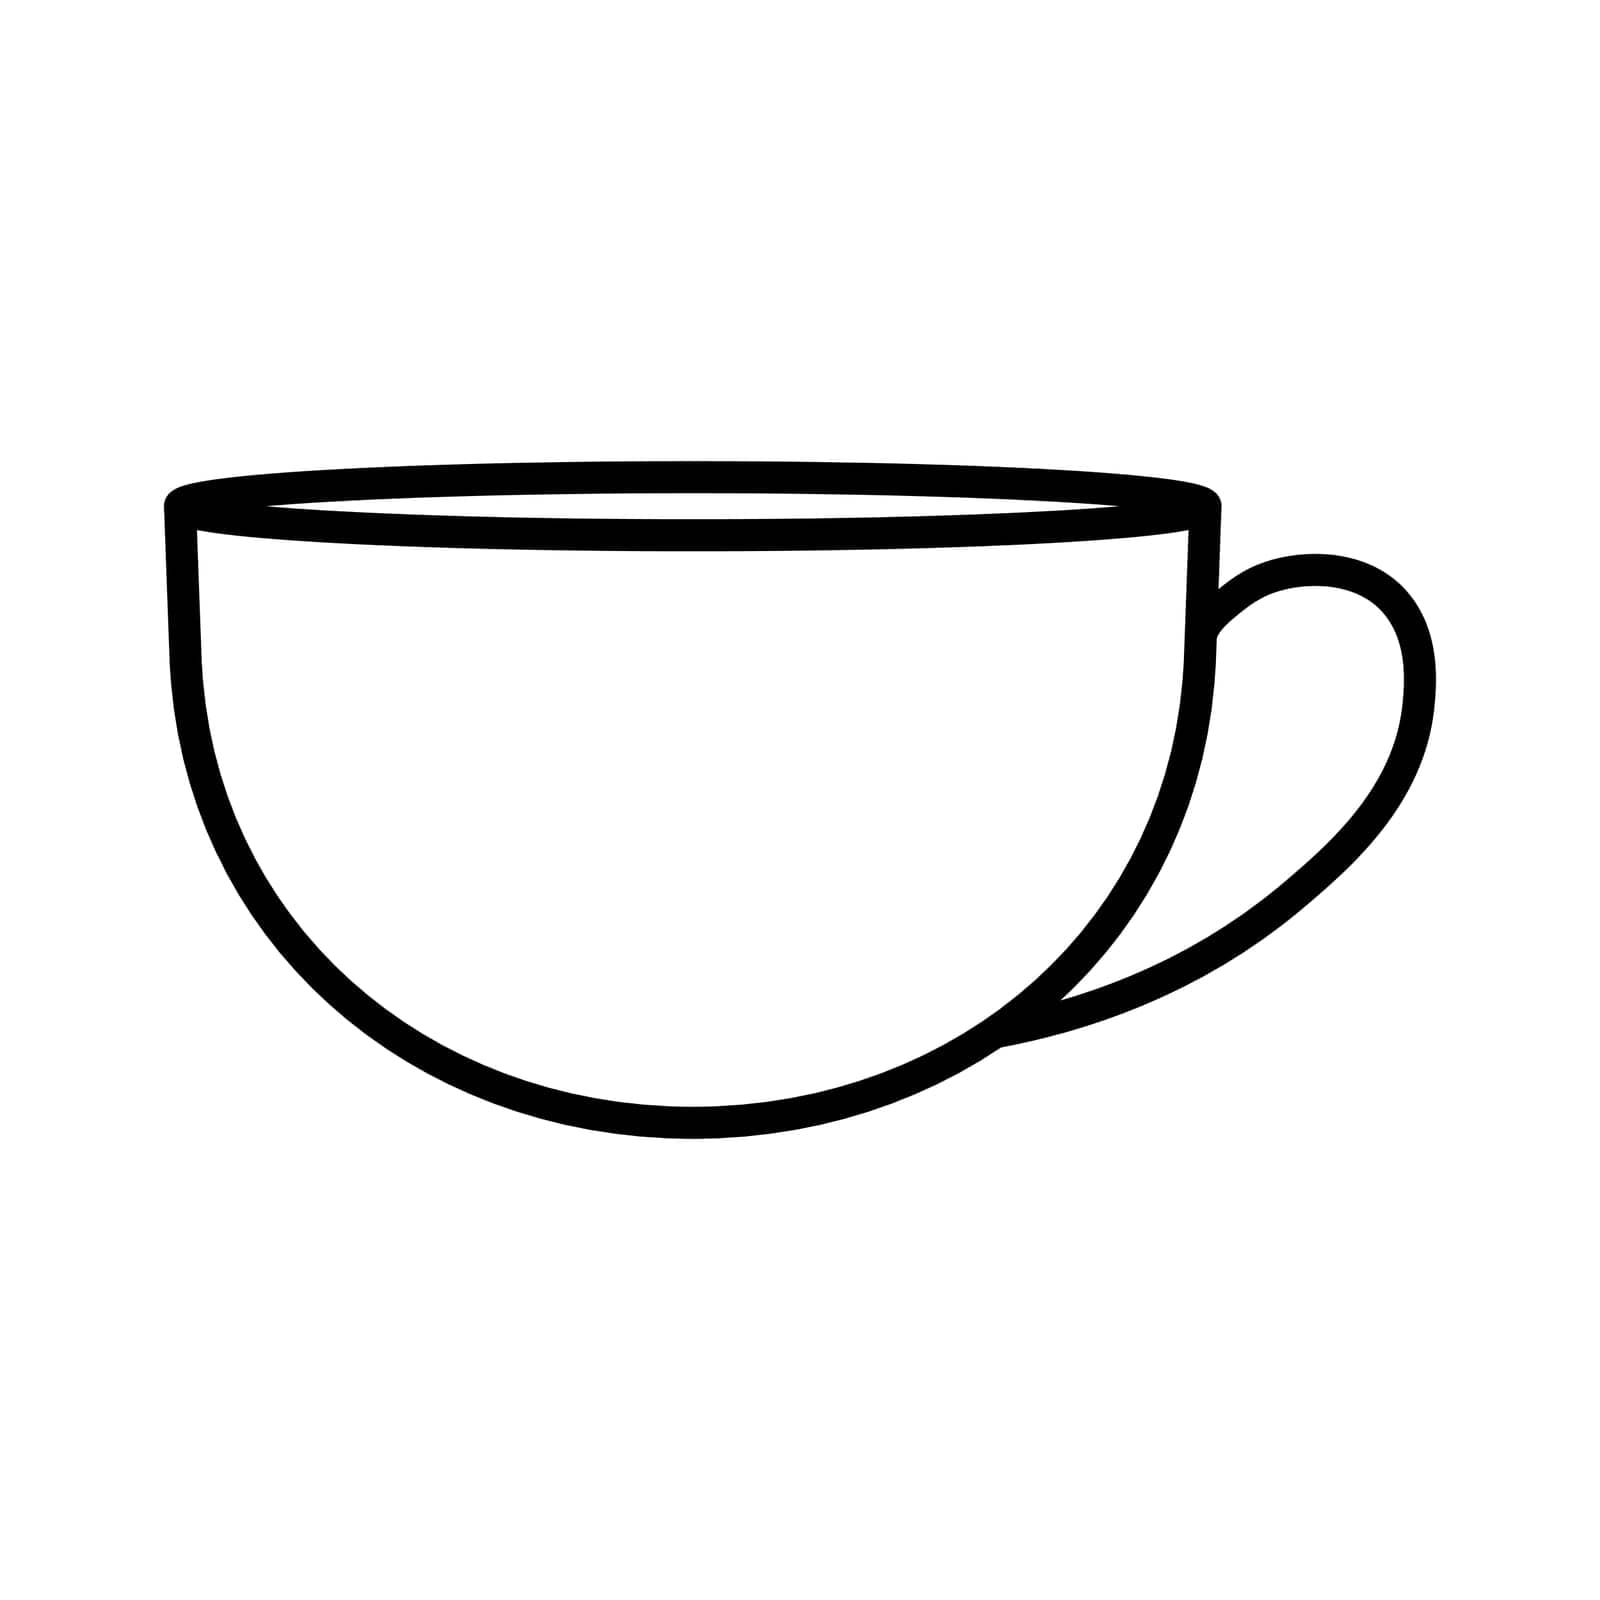 Cup icon symbol simple design by misteremil